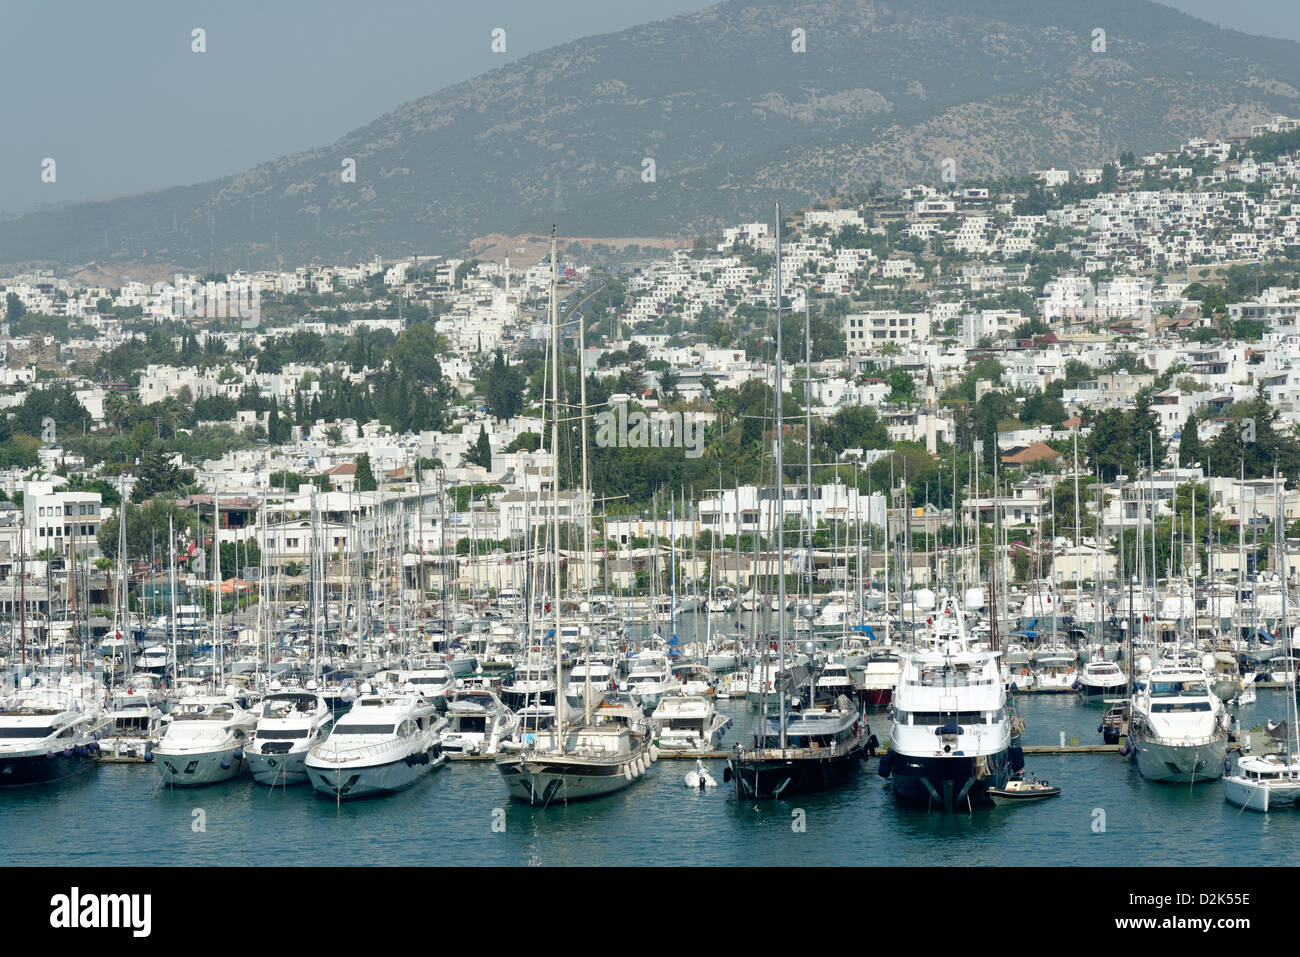 Bodrum Turkey. The cosmopolitan, vibrant and historical city of Bodrum, known in antiquity as Halicarnassus. Stock Photo